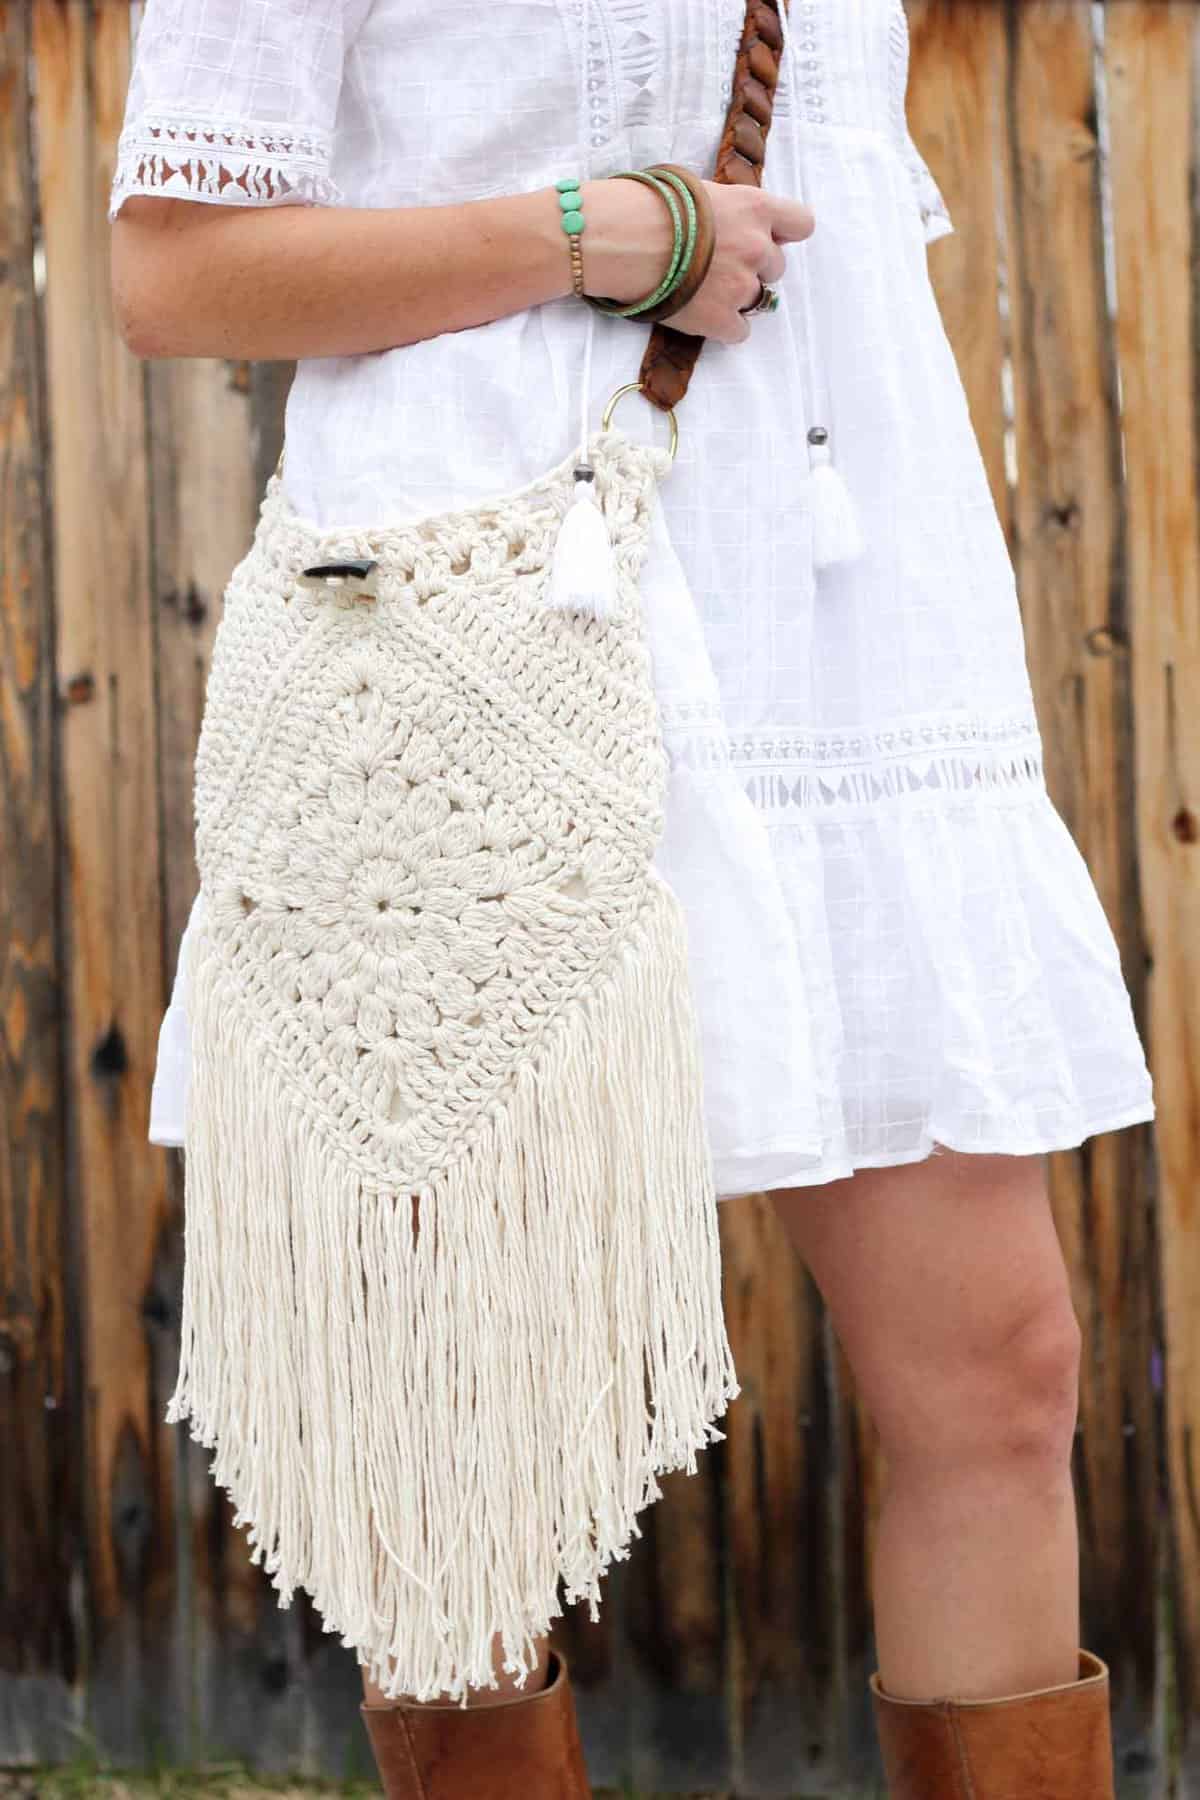 Boho love! This boho bag free crochet pattern is fun to put together and loaded with bohemian charm. Made with Lion Brand Kitchen Cotton in "Vanilla."